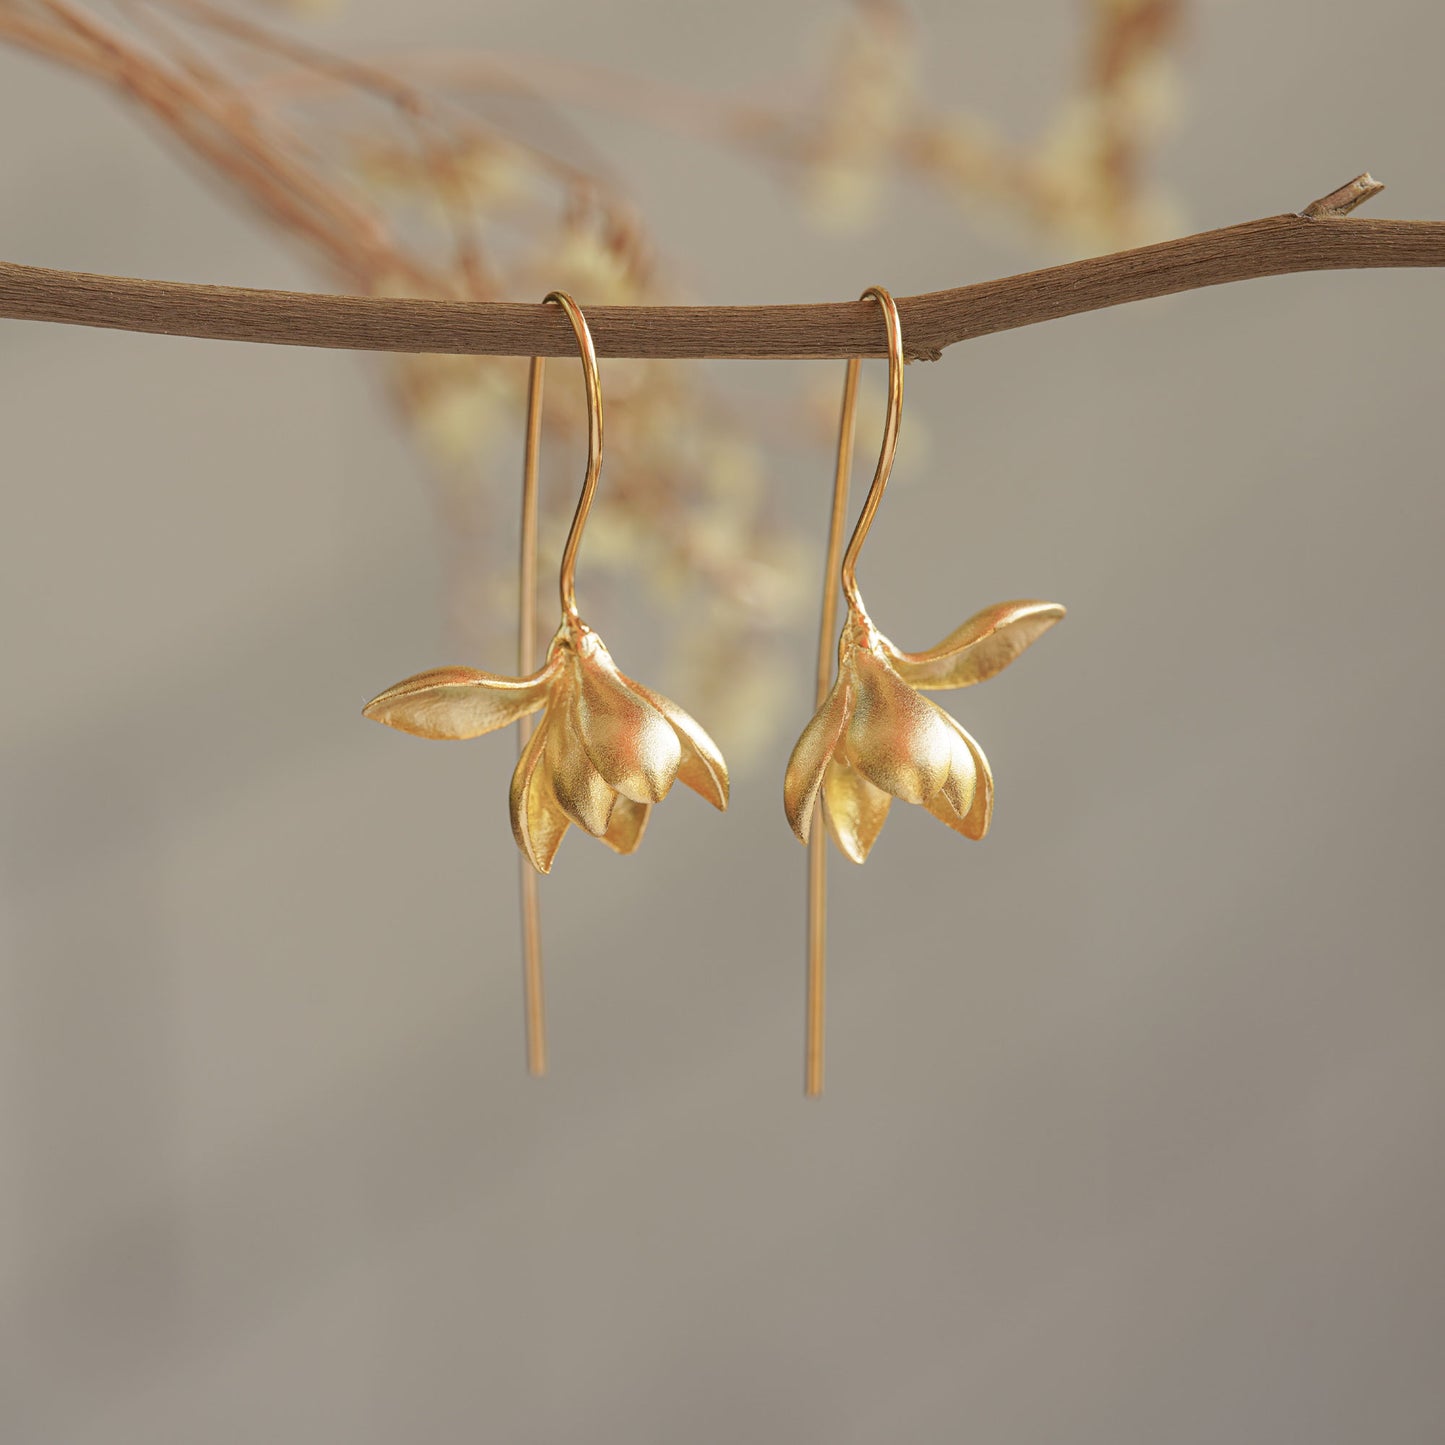 Golden magnolia earrings hanging from a tree branch